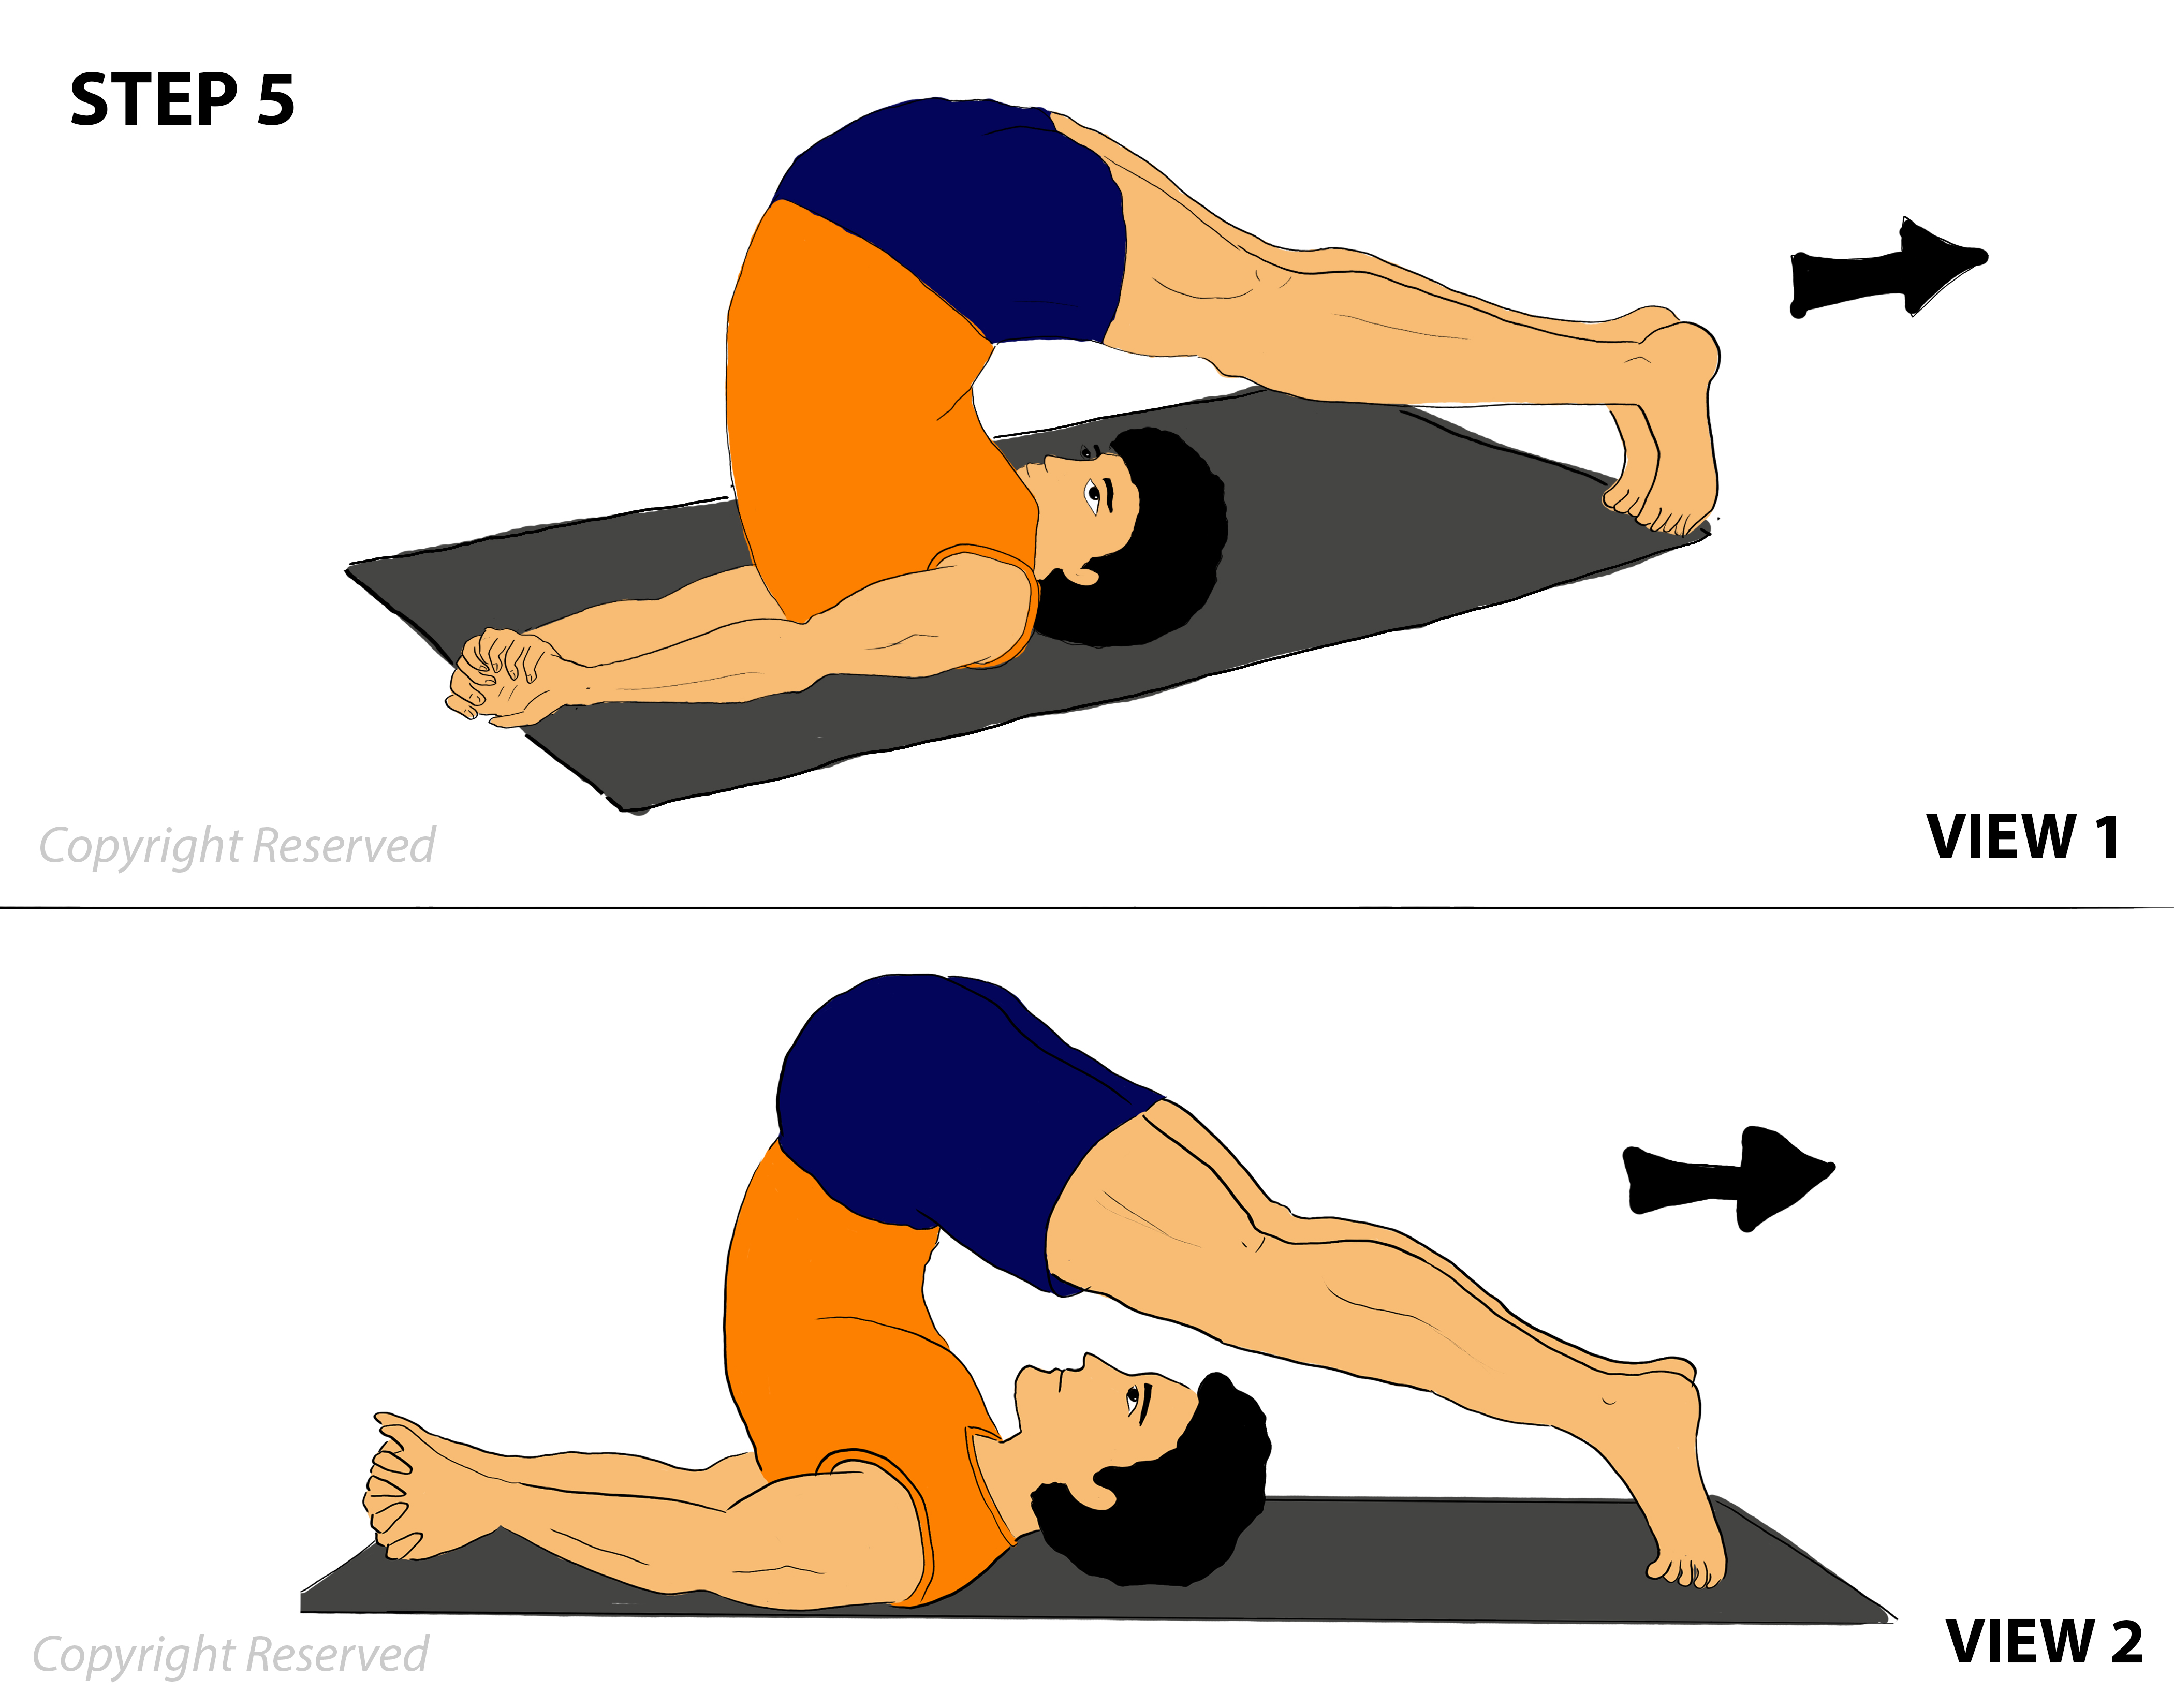 Advantages & Disadvantages of the 'Plough Pose' in Yoga | livestrong